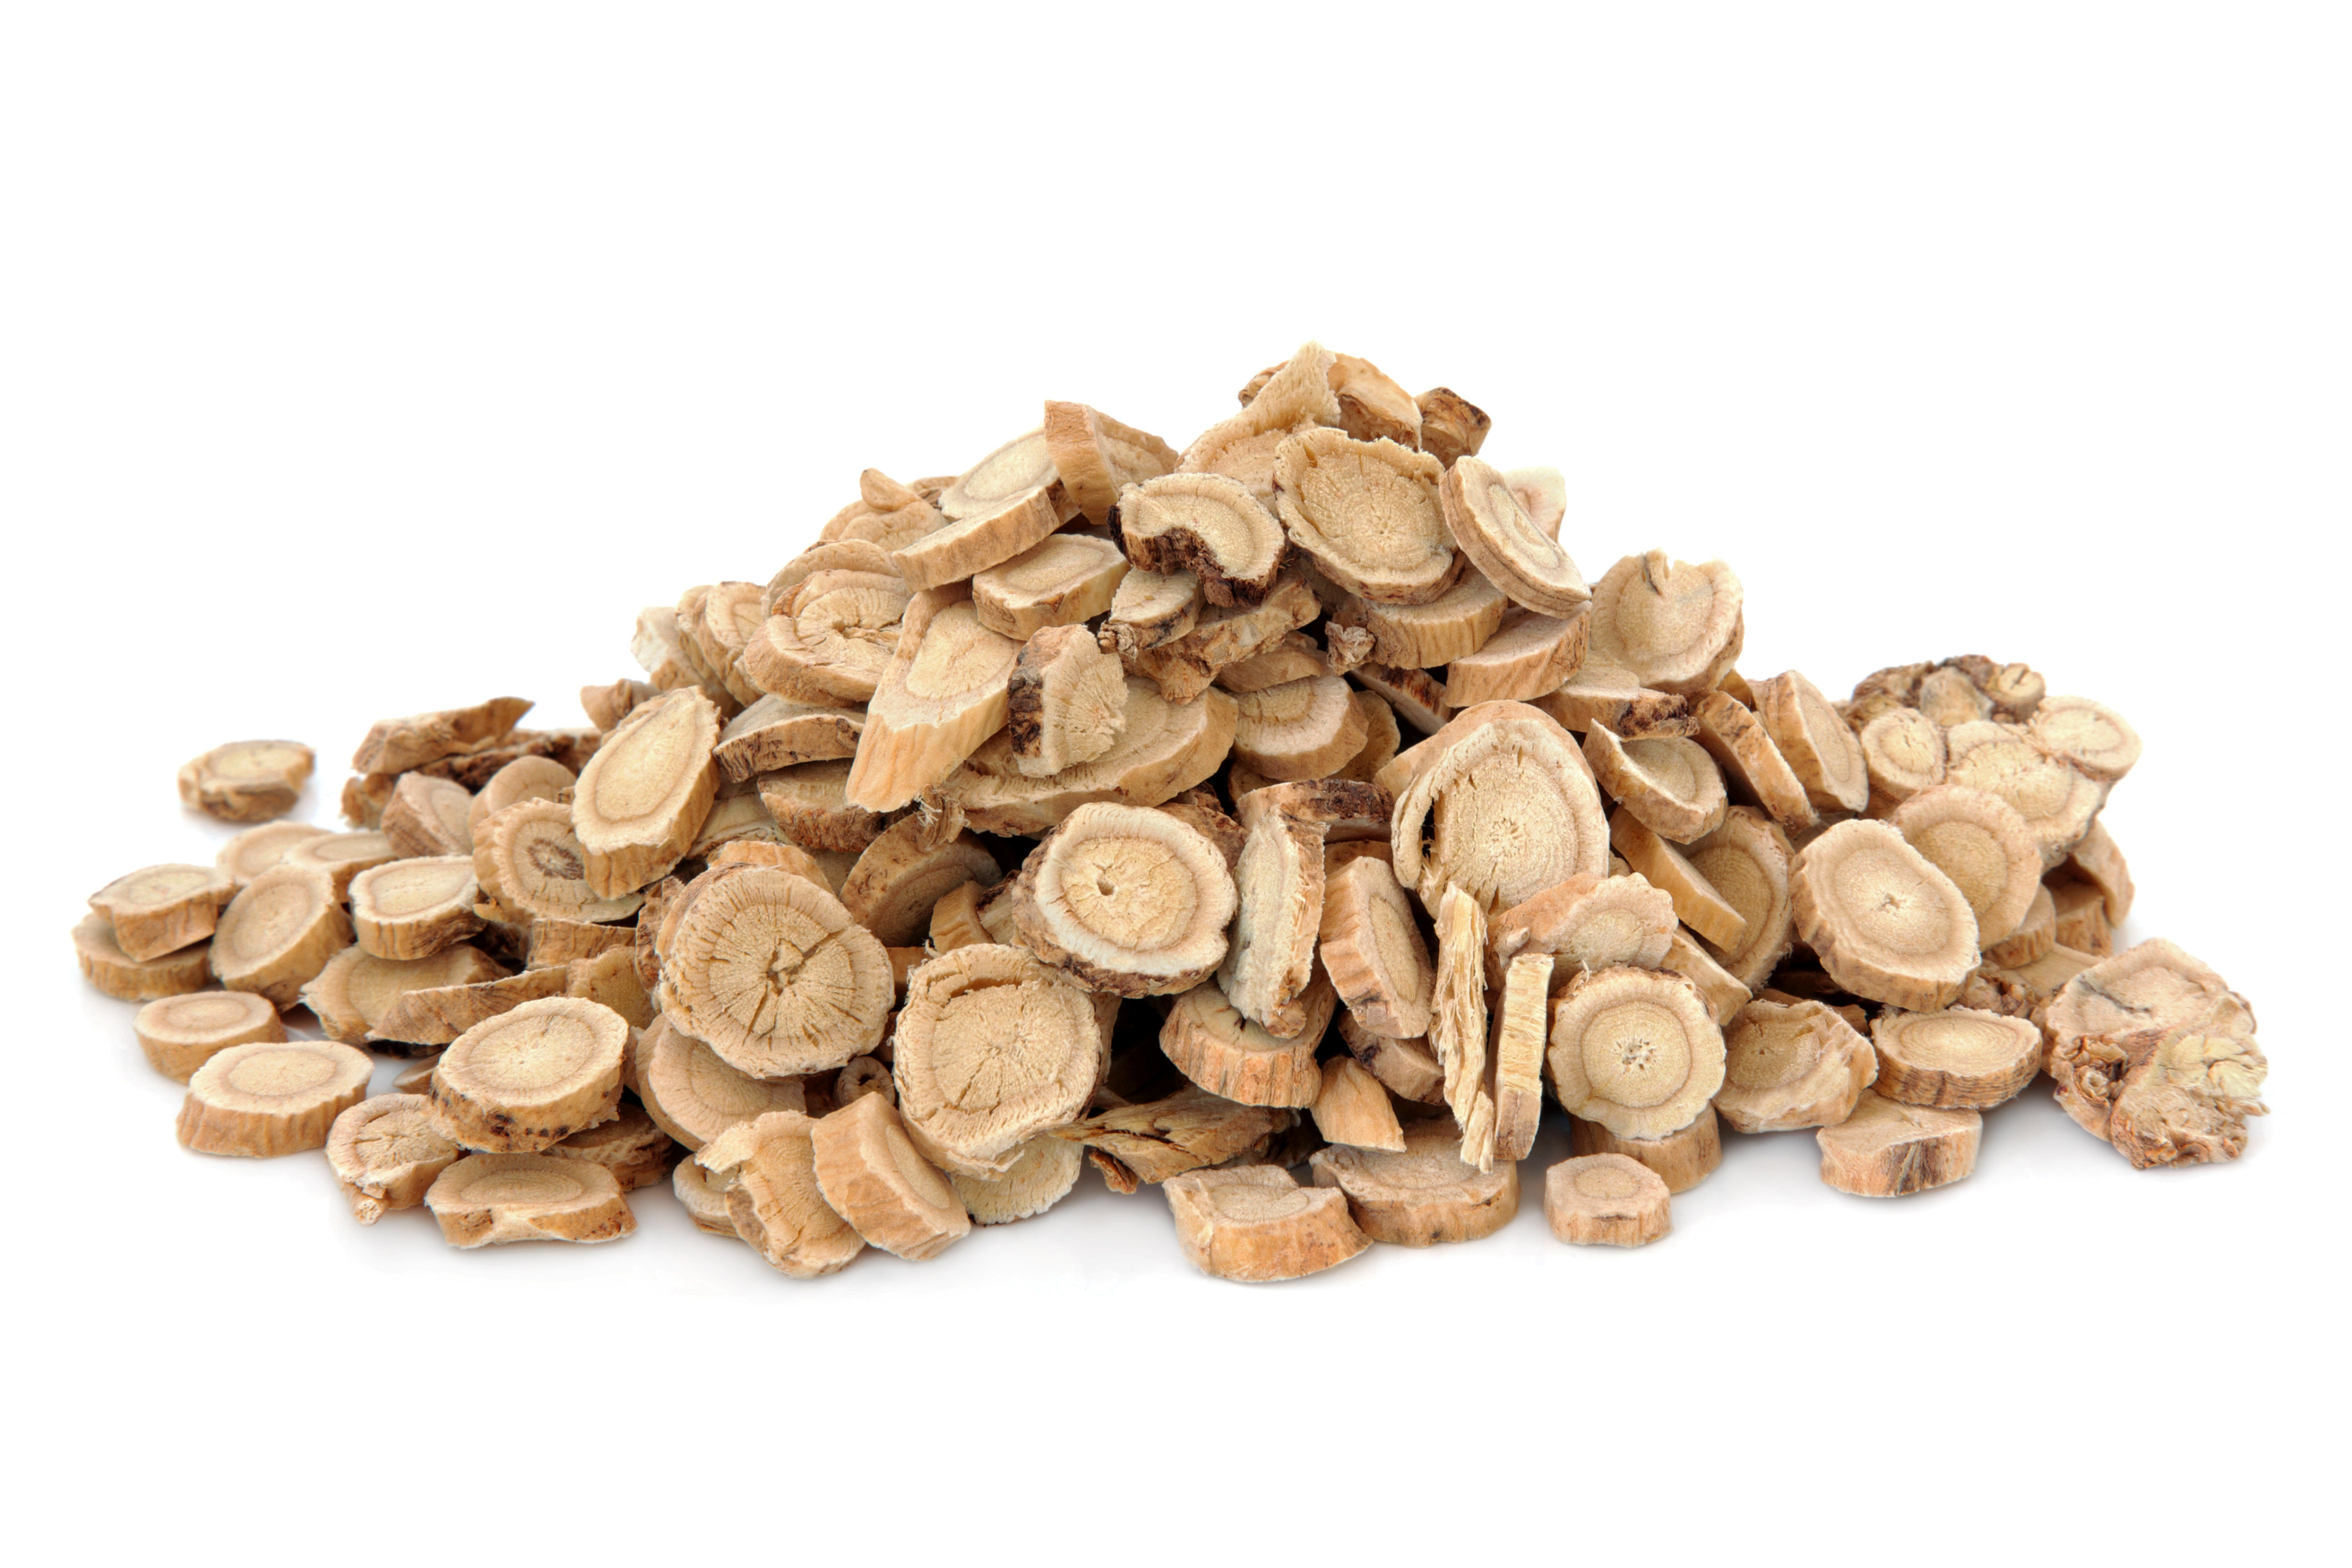 Astragalus root herb is used in Chinese Traditional Medicine and has been found to reduce inflammation without negatively affecting the body’s immune system. Photo: Shutterstock